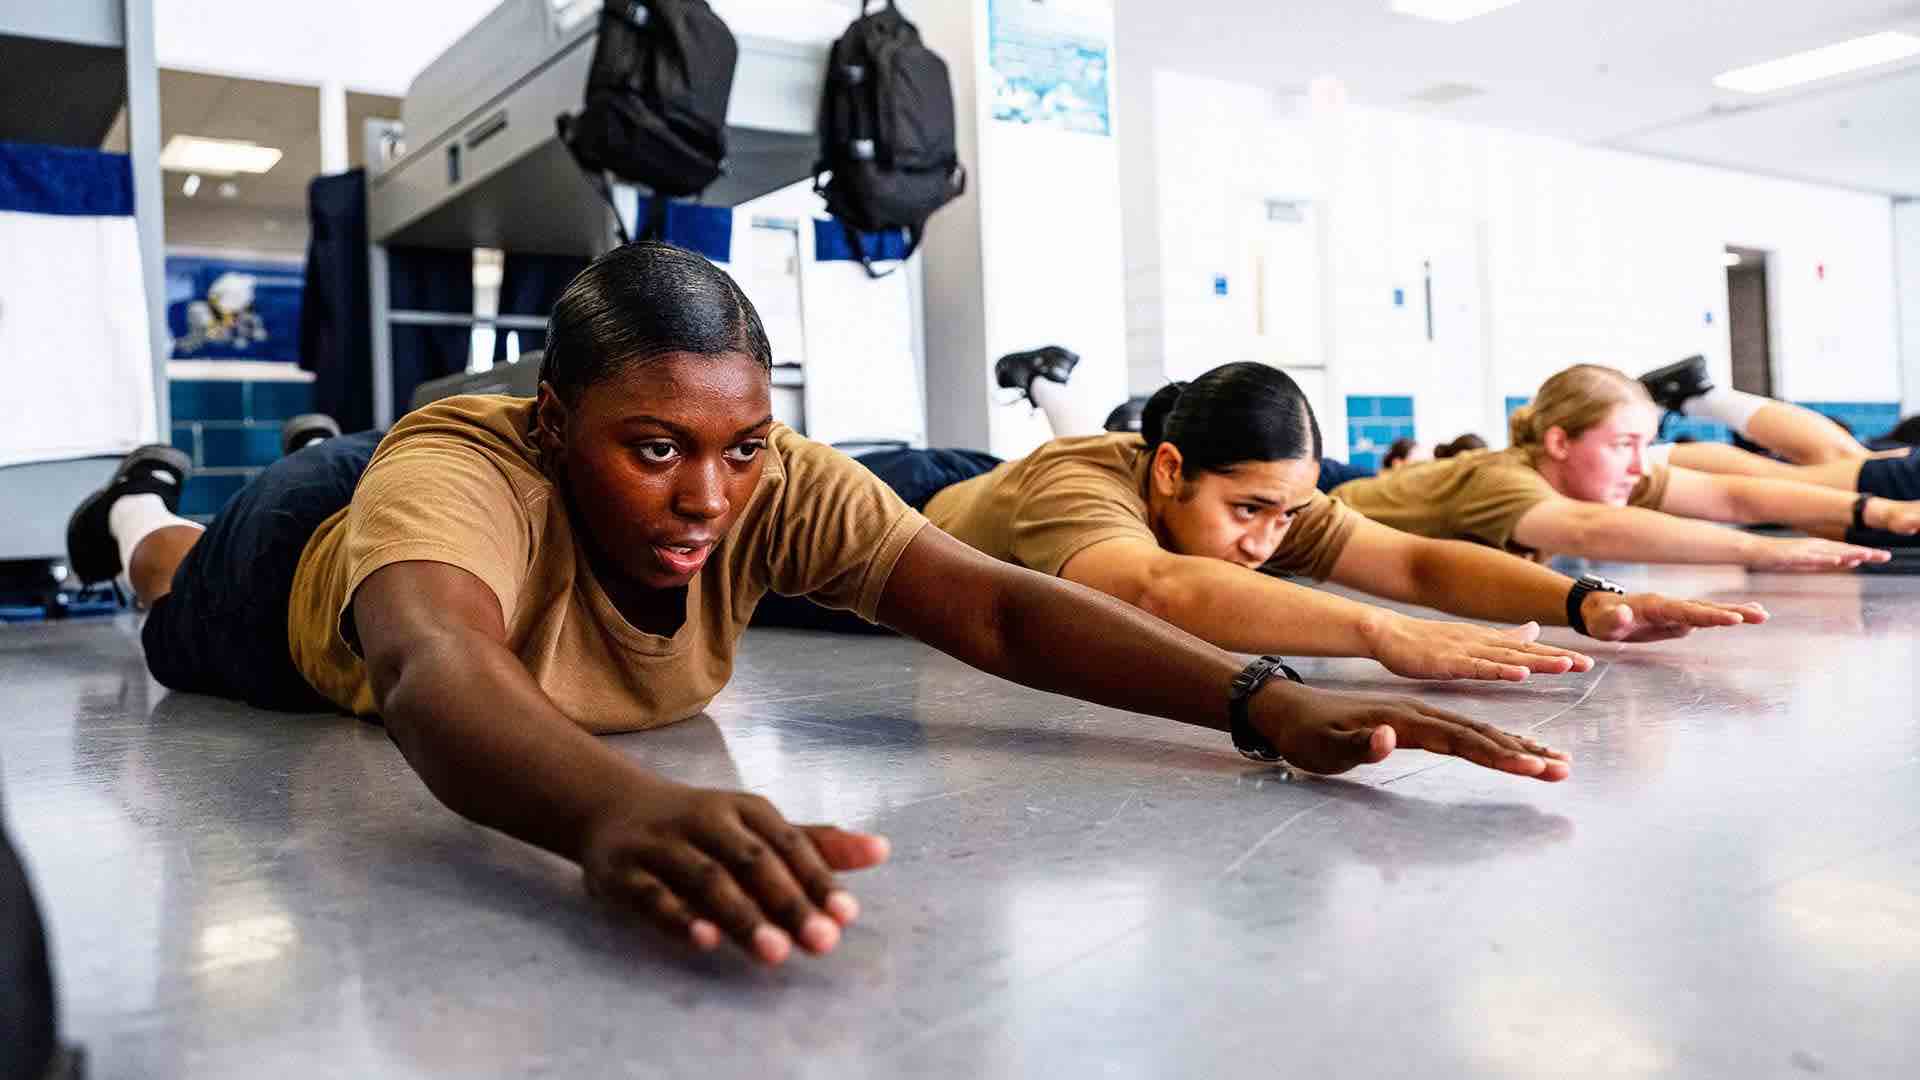 Navy Recruits participate in physical fitness training at Recruit Training Command, or Navy Boot Camp, in Great Lakes, IL. 